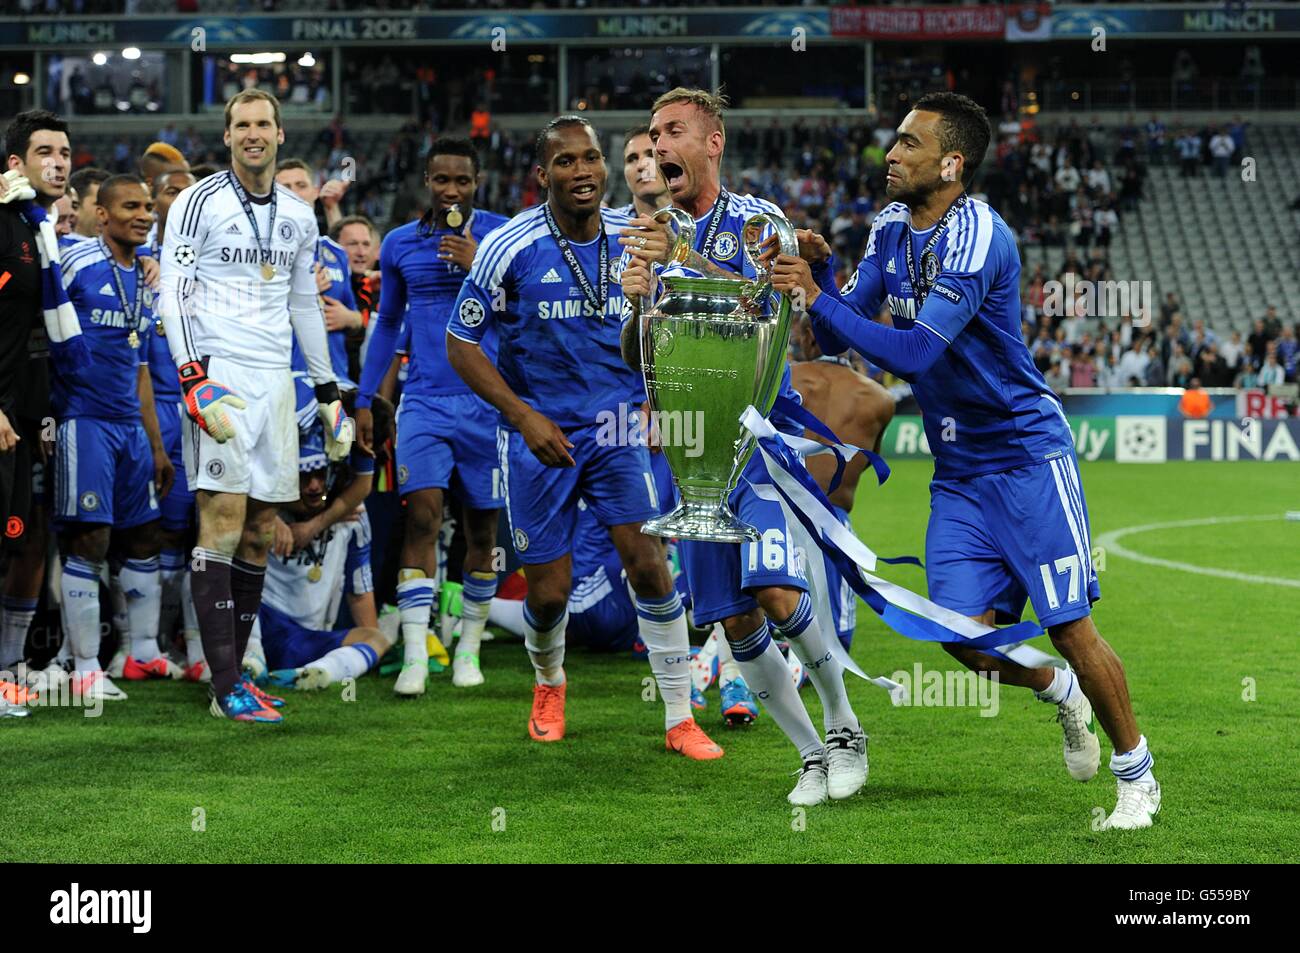 Soccer - UEFA Champions League - Final - Bayern Munich v Chelsea - Allianz Arena. Chelsea's Jose Bosingwa (right) and Raul Meireles (second right) celebrate winning the UEFA Champions League, after the final whistle Stock Photo